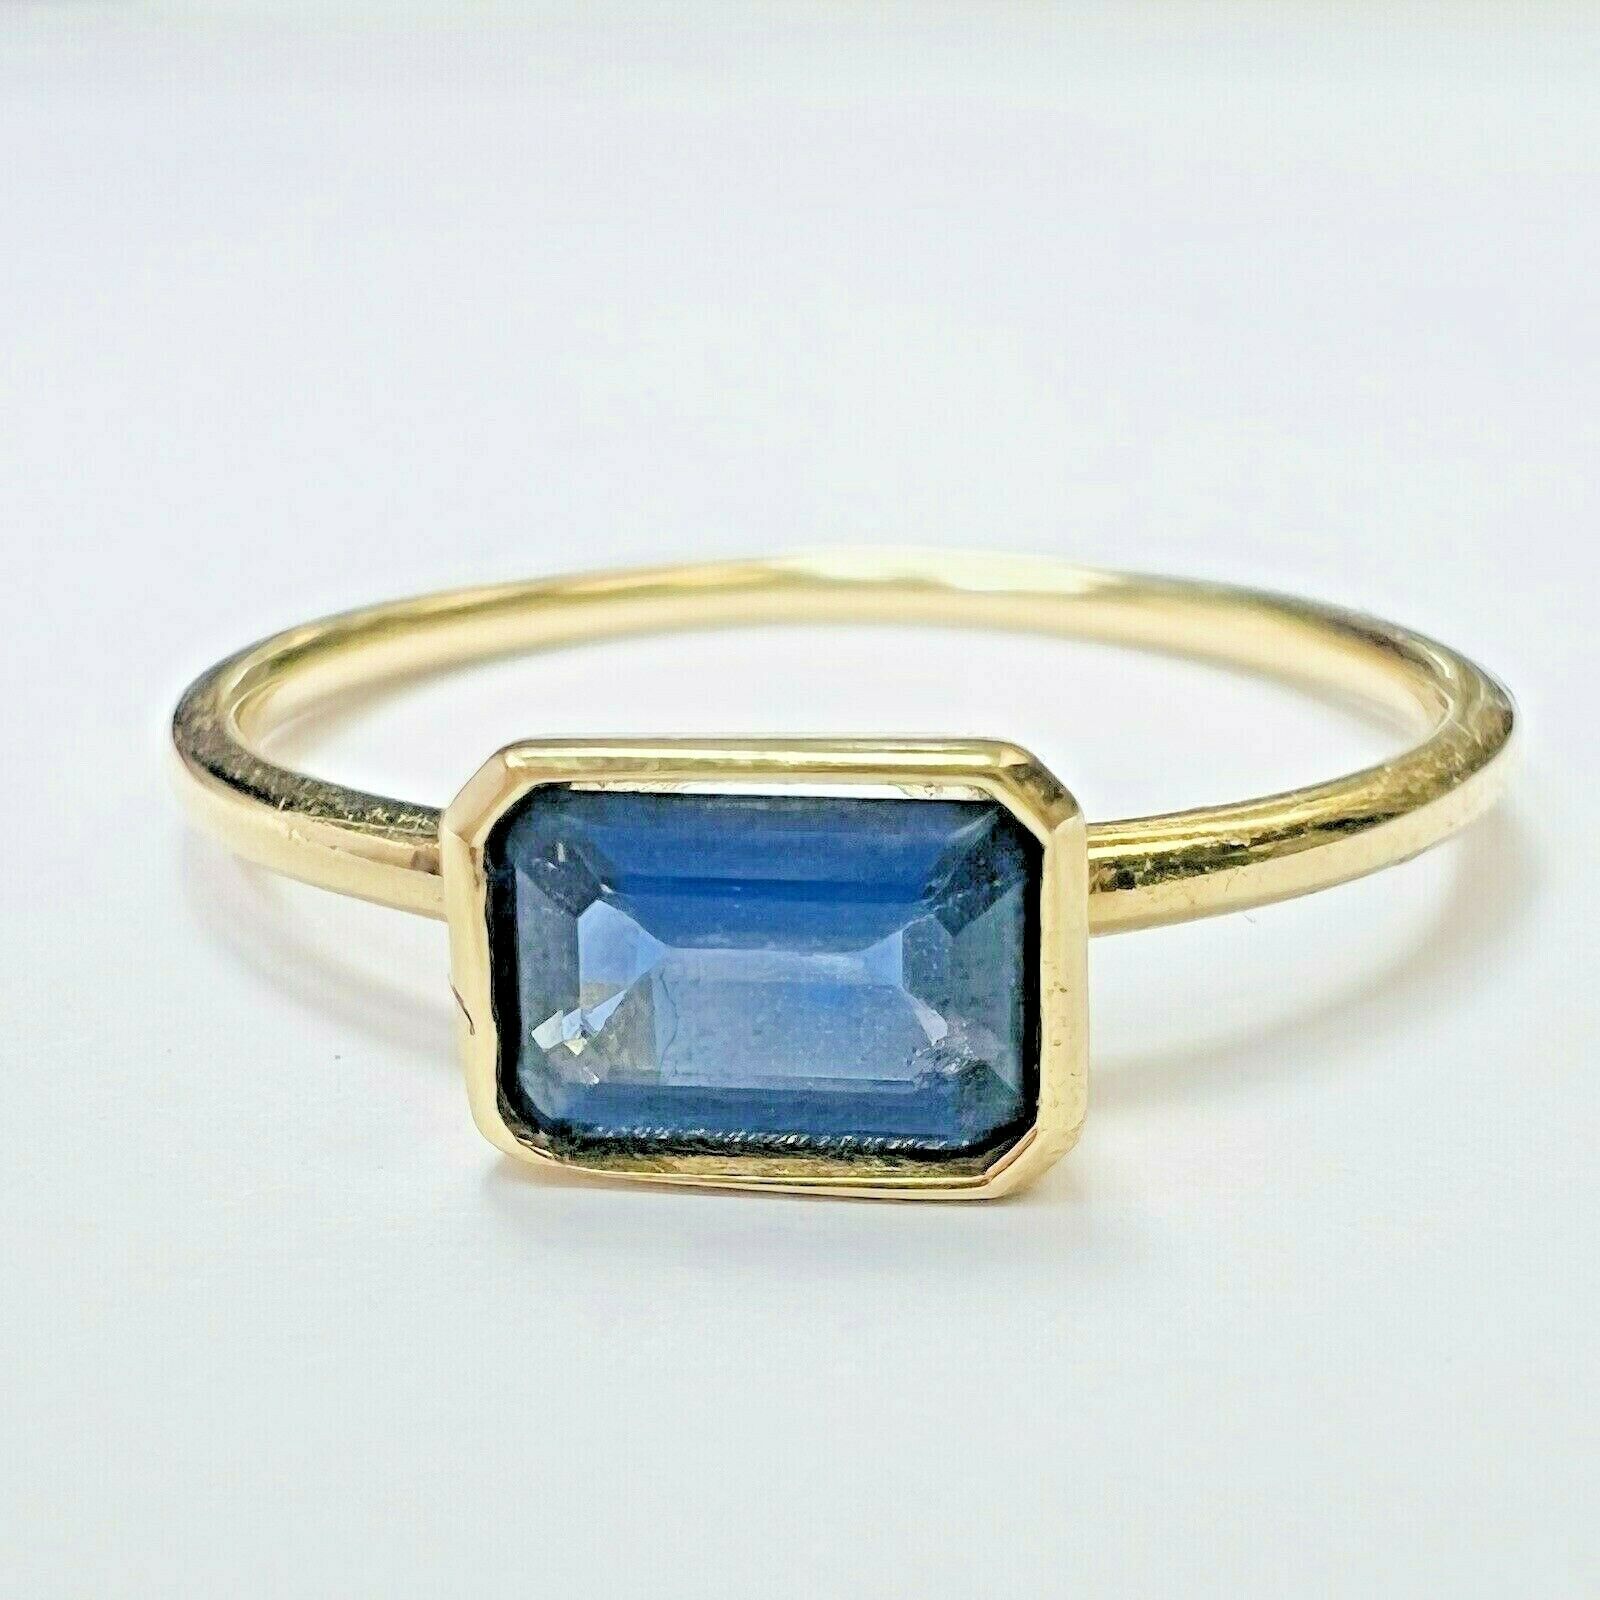 Solid 18K Yellow Gold Bezel set Sapphire Dainty Ring Band Size 7.25